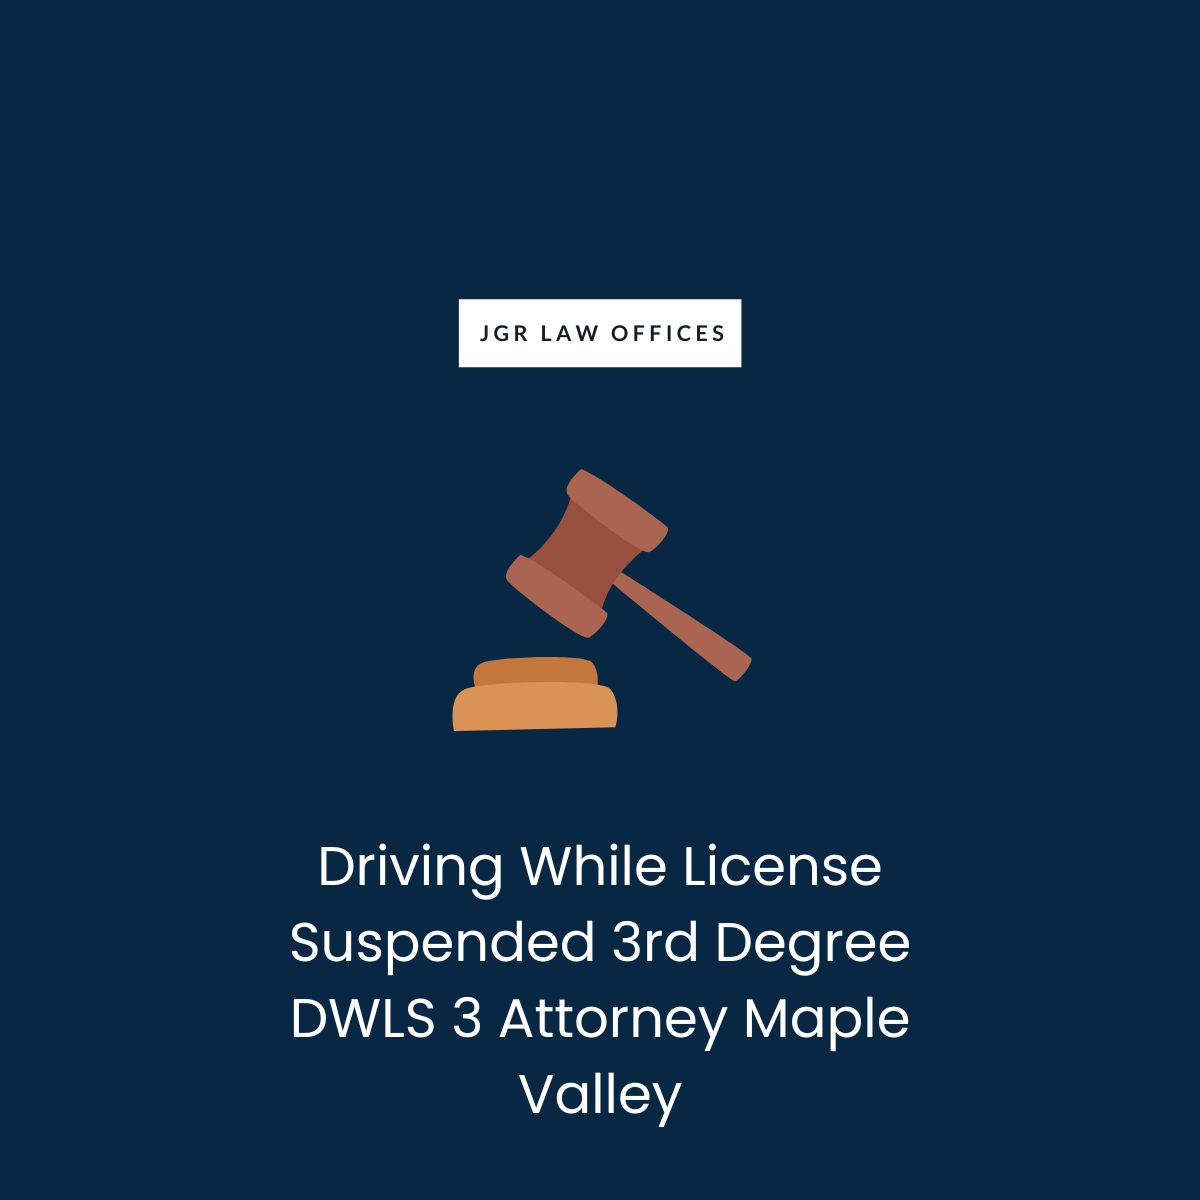 Driving While License Suspended 3rd Degree DWLS 3 Lawyer Maple Valley Driving While License Suspended 3rd Degree DWLS 3 Driving While License Suspended 3rd Degree DWLS 3